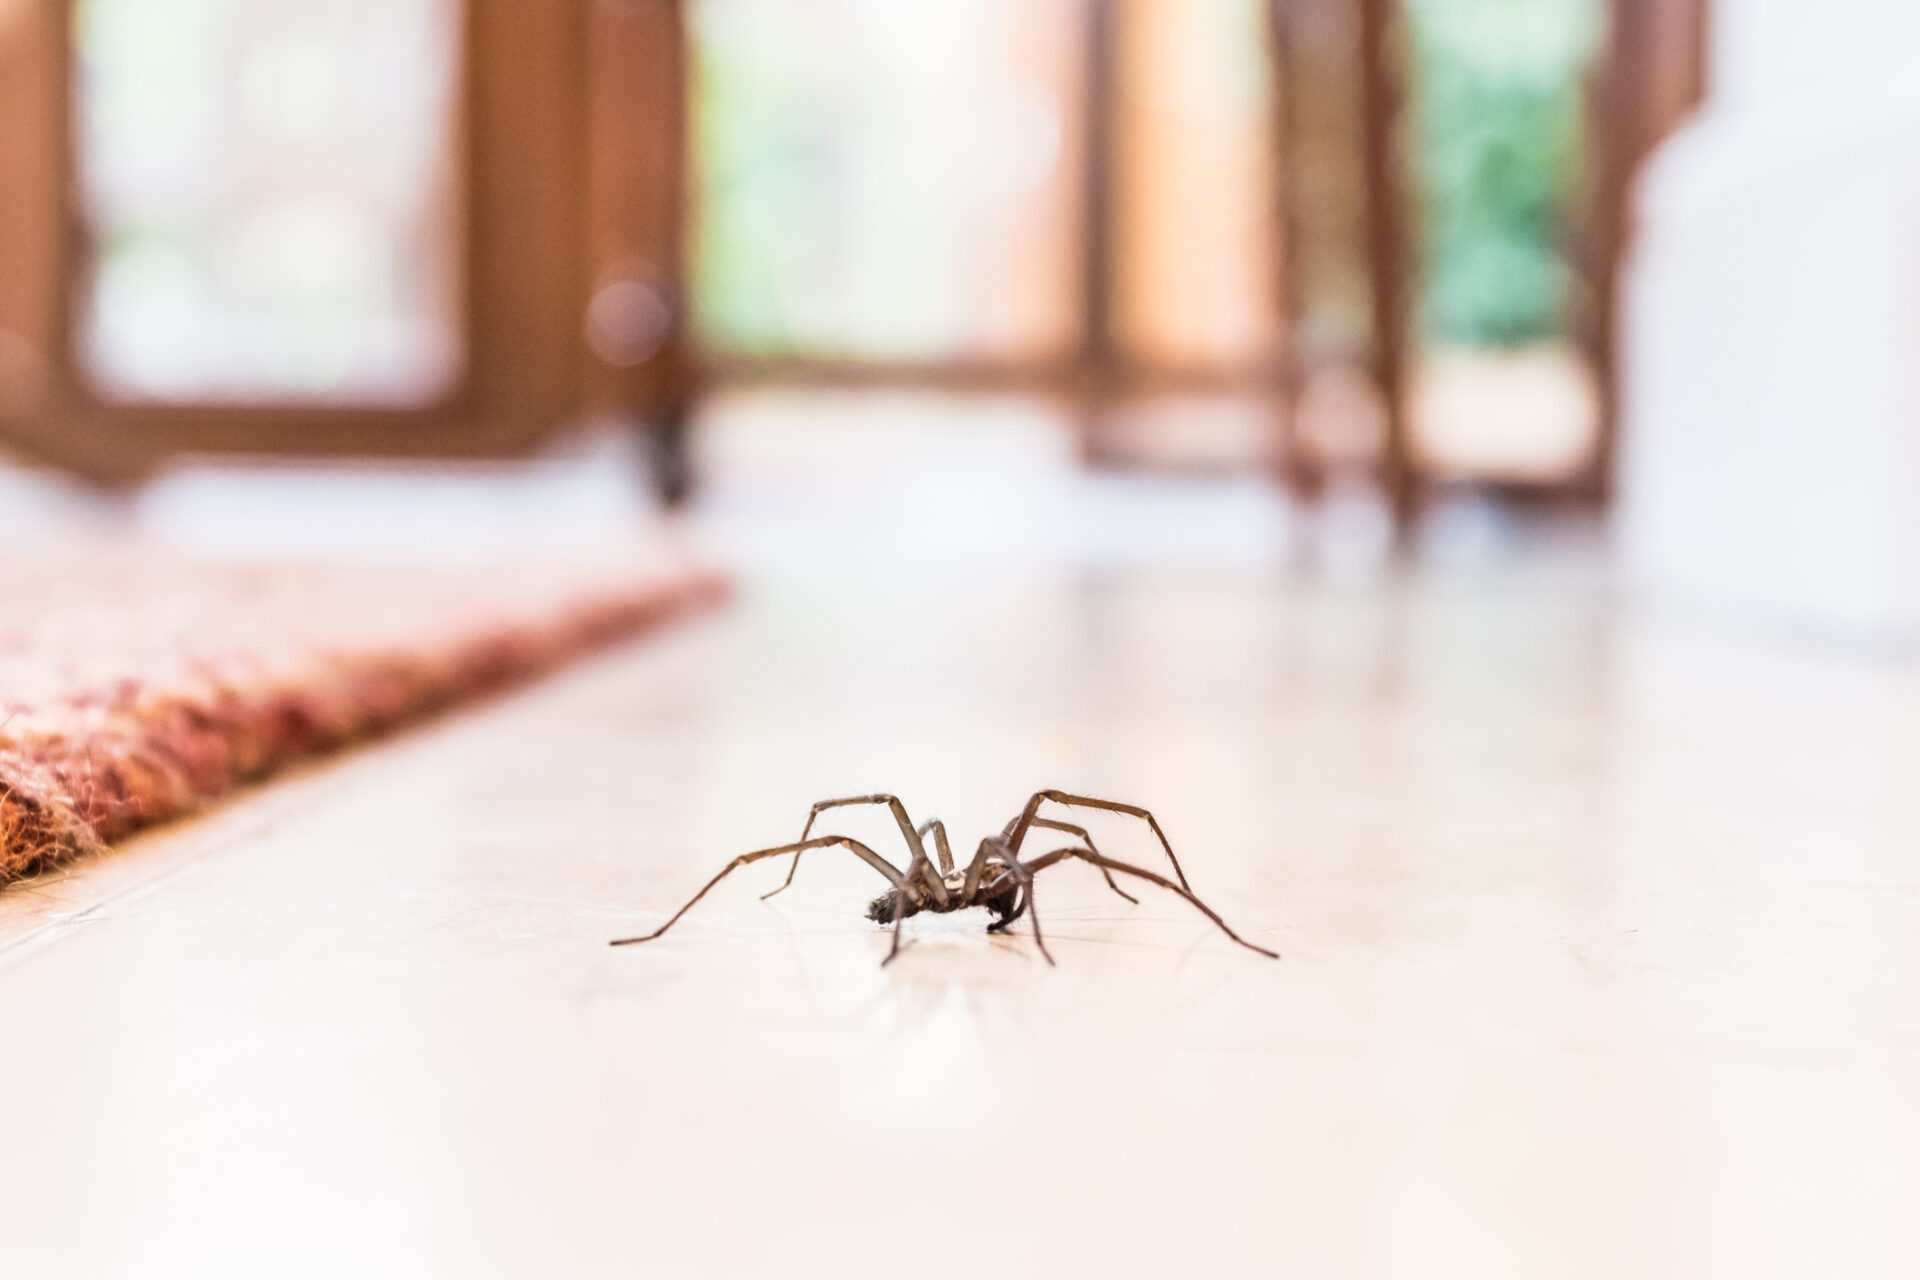 Some spider bites can really pack a punch.  For serious infections, seek the help of the experts at the Methodist Wound Treatment Center.